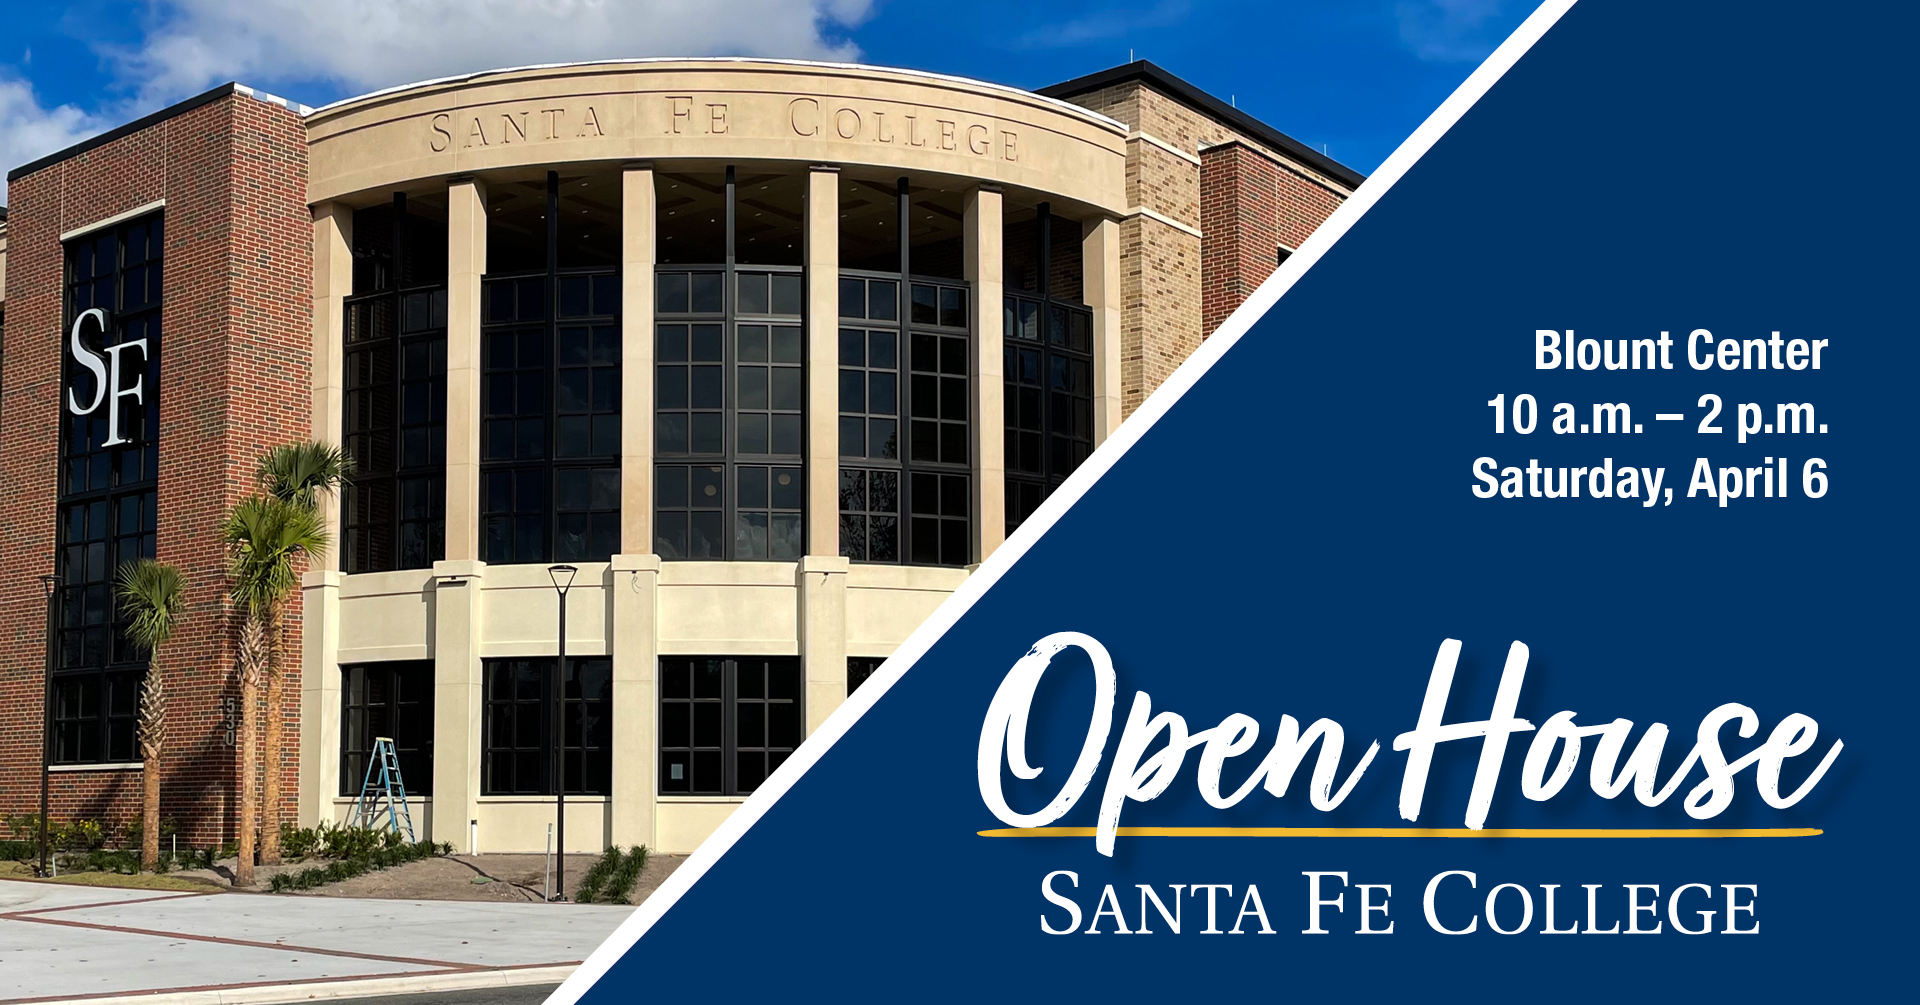 The front of Santa Fe College's Blount Center with information about Open House.